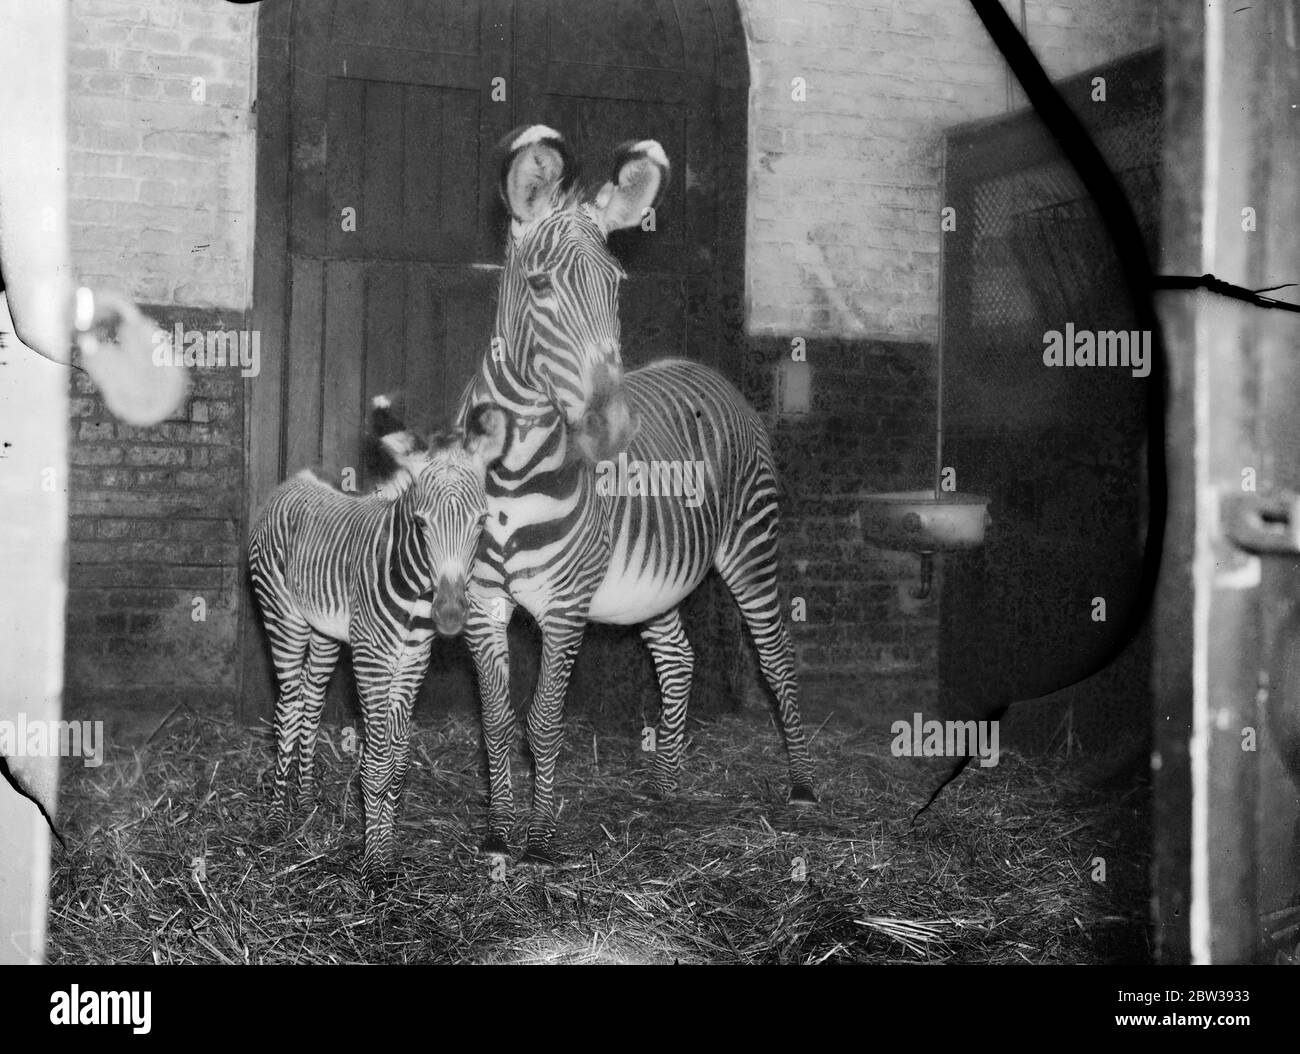 New baby zebra born at London Zoo . Jenny , the zebra at London Zoo , presented its keeper with a baby daughter on Good Friday . It is proposed to name the filly foal ,  Freda  . Photo shows ; Jenny the zebra with her daughter at London Zoo . 4 April 1934 30s, 30's, 1930s, 1930's, thirties, nineteen thirties Stock Photo